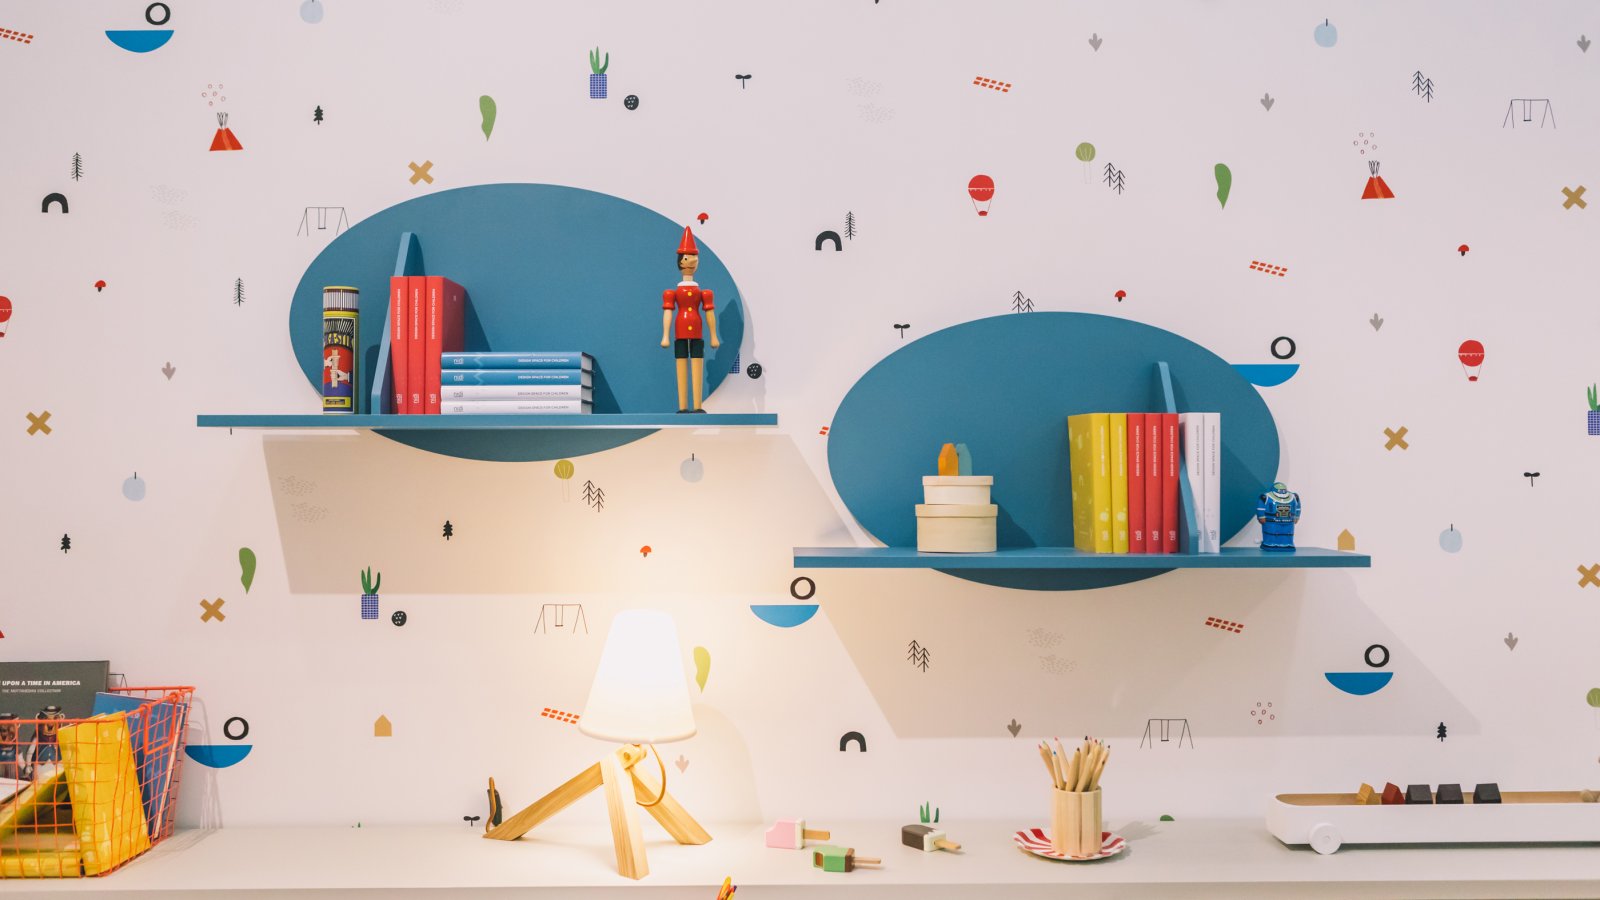 Kids collections and Teens spaces at Hábitat Valencia fair 2018